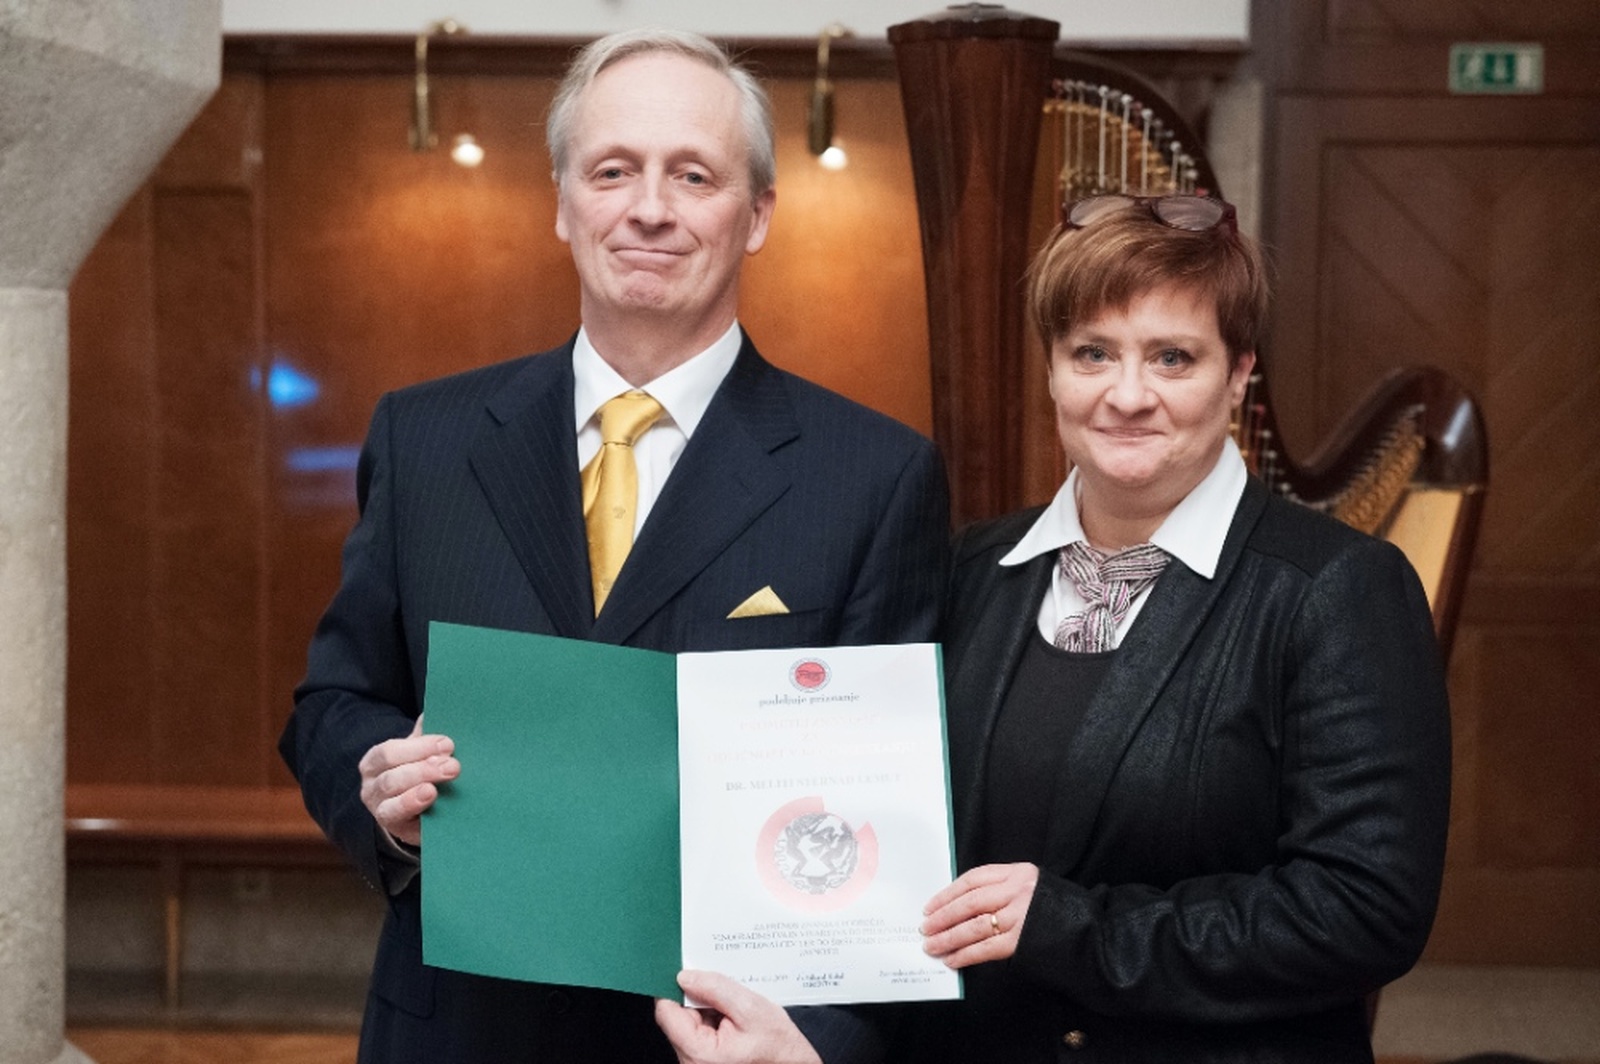 The Award “The Prometheus of Science for Excellence in Communication for 2014” was received by a faculty member of the University of Nova Gorica